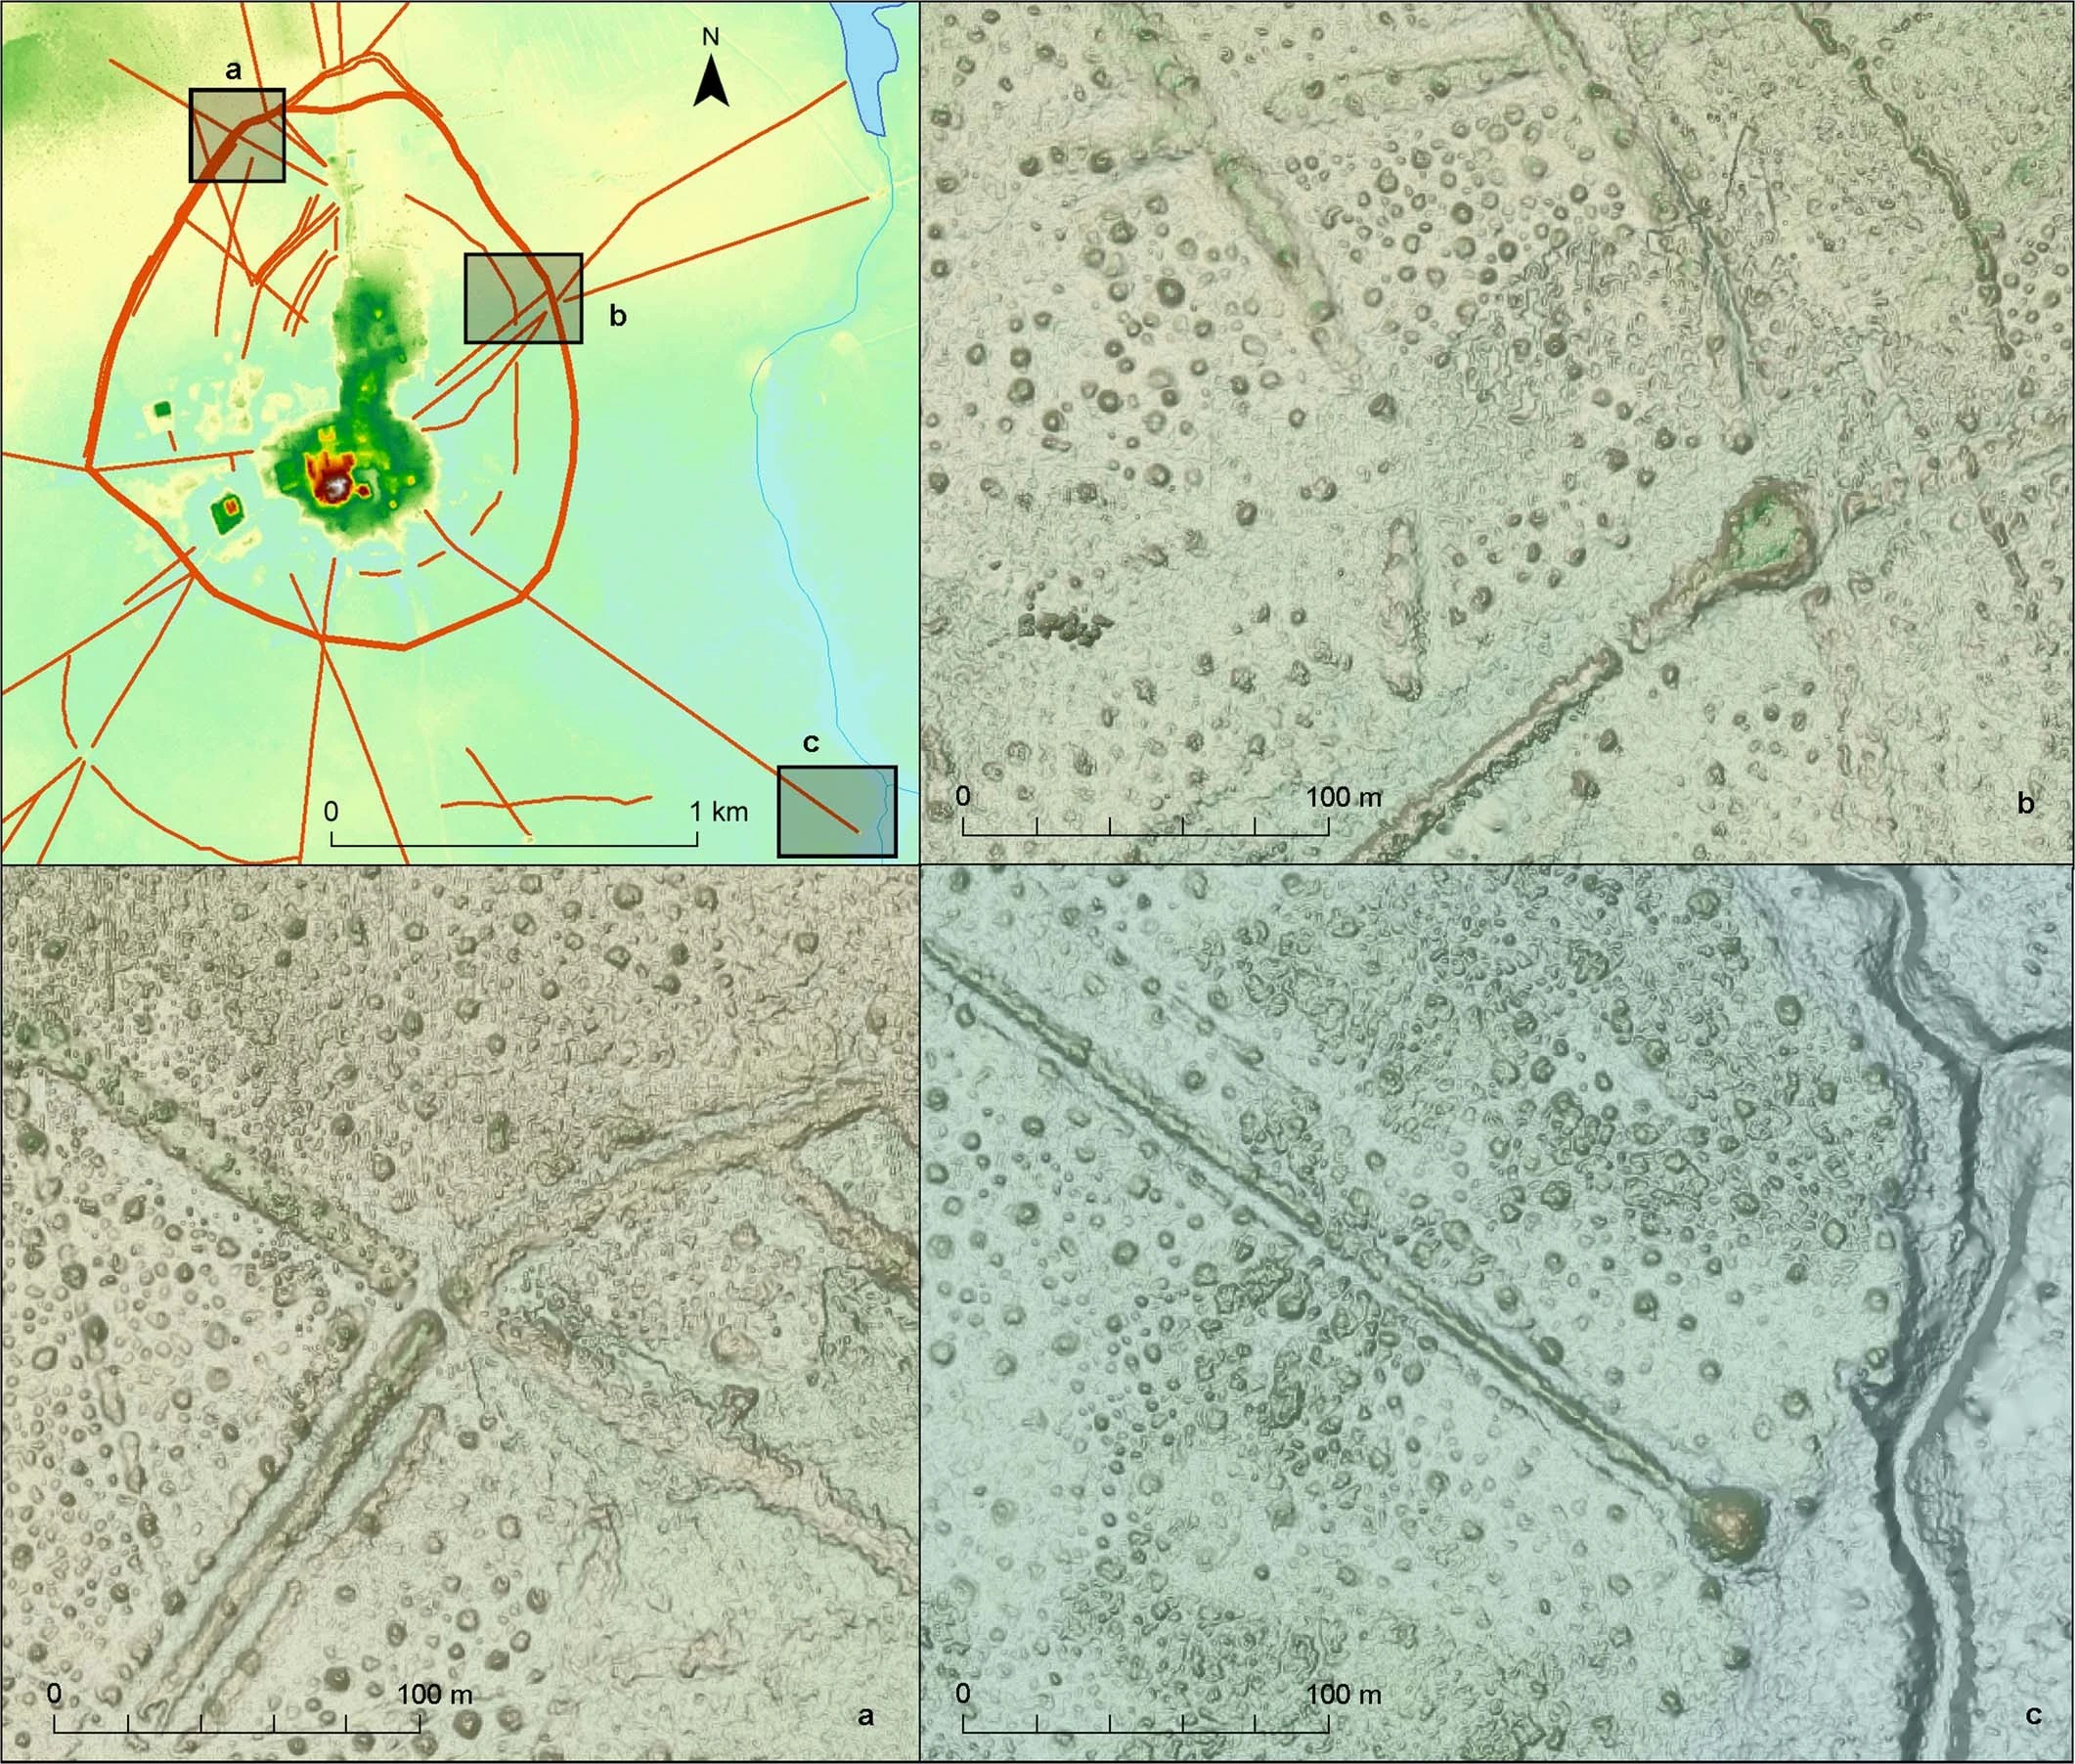 Lidar imagery of features discovered in the Casarabe city using lidar.